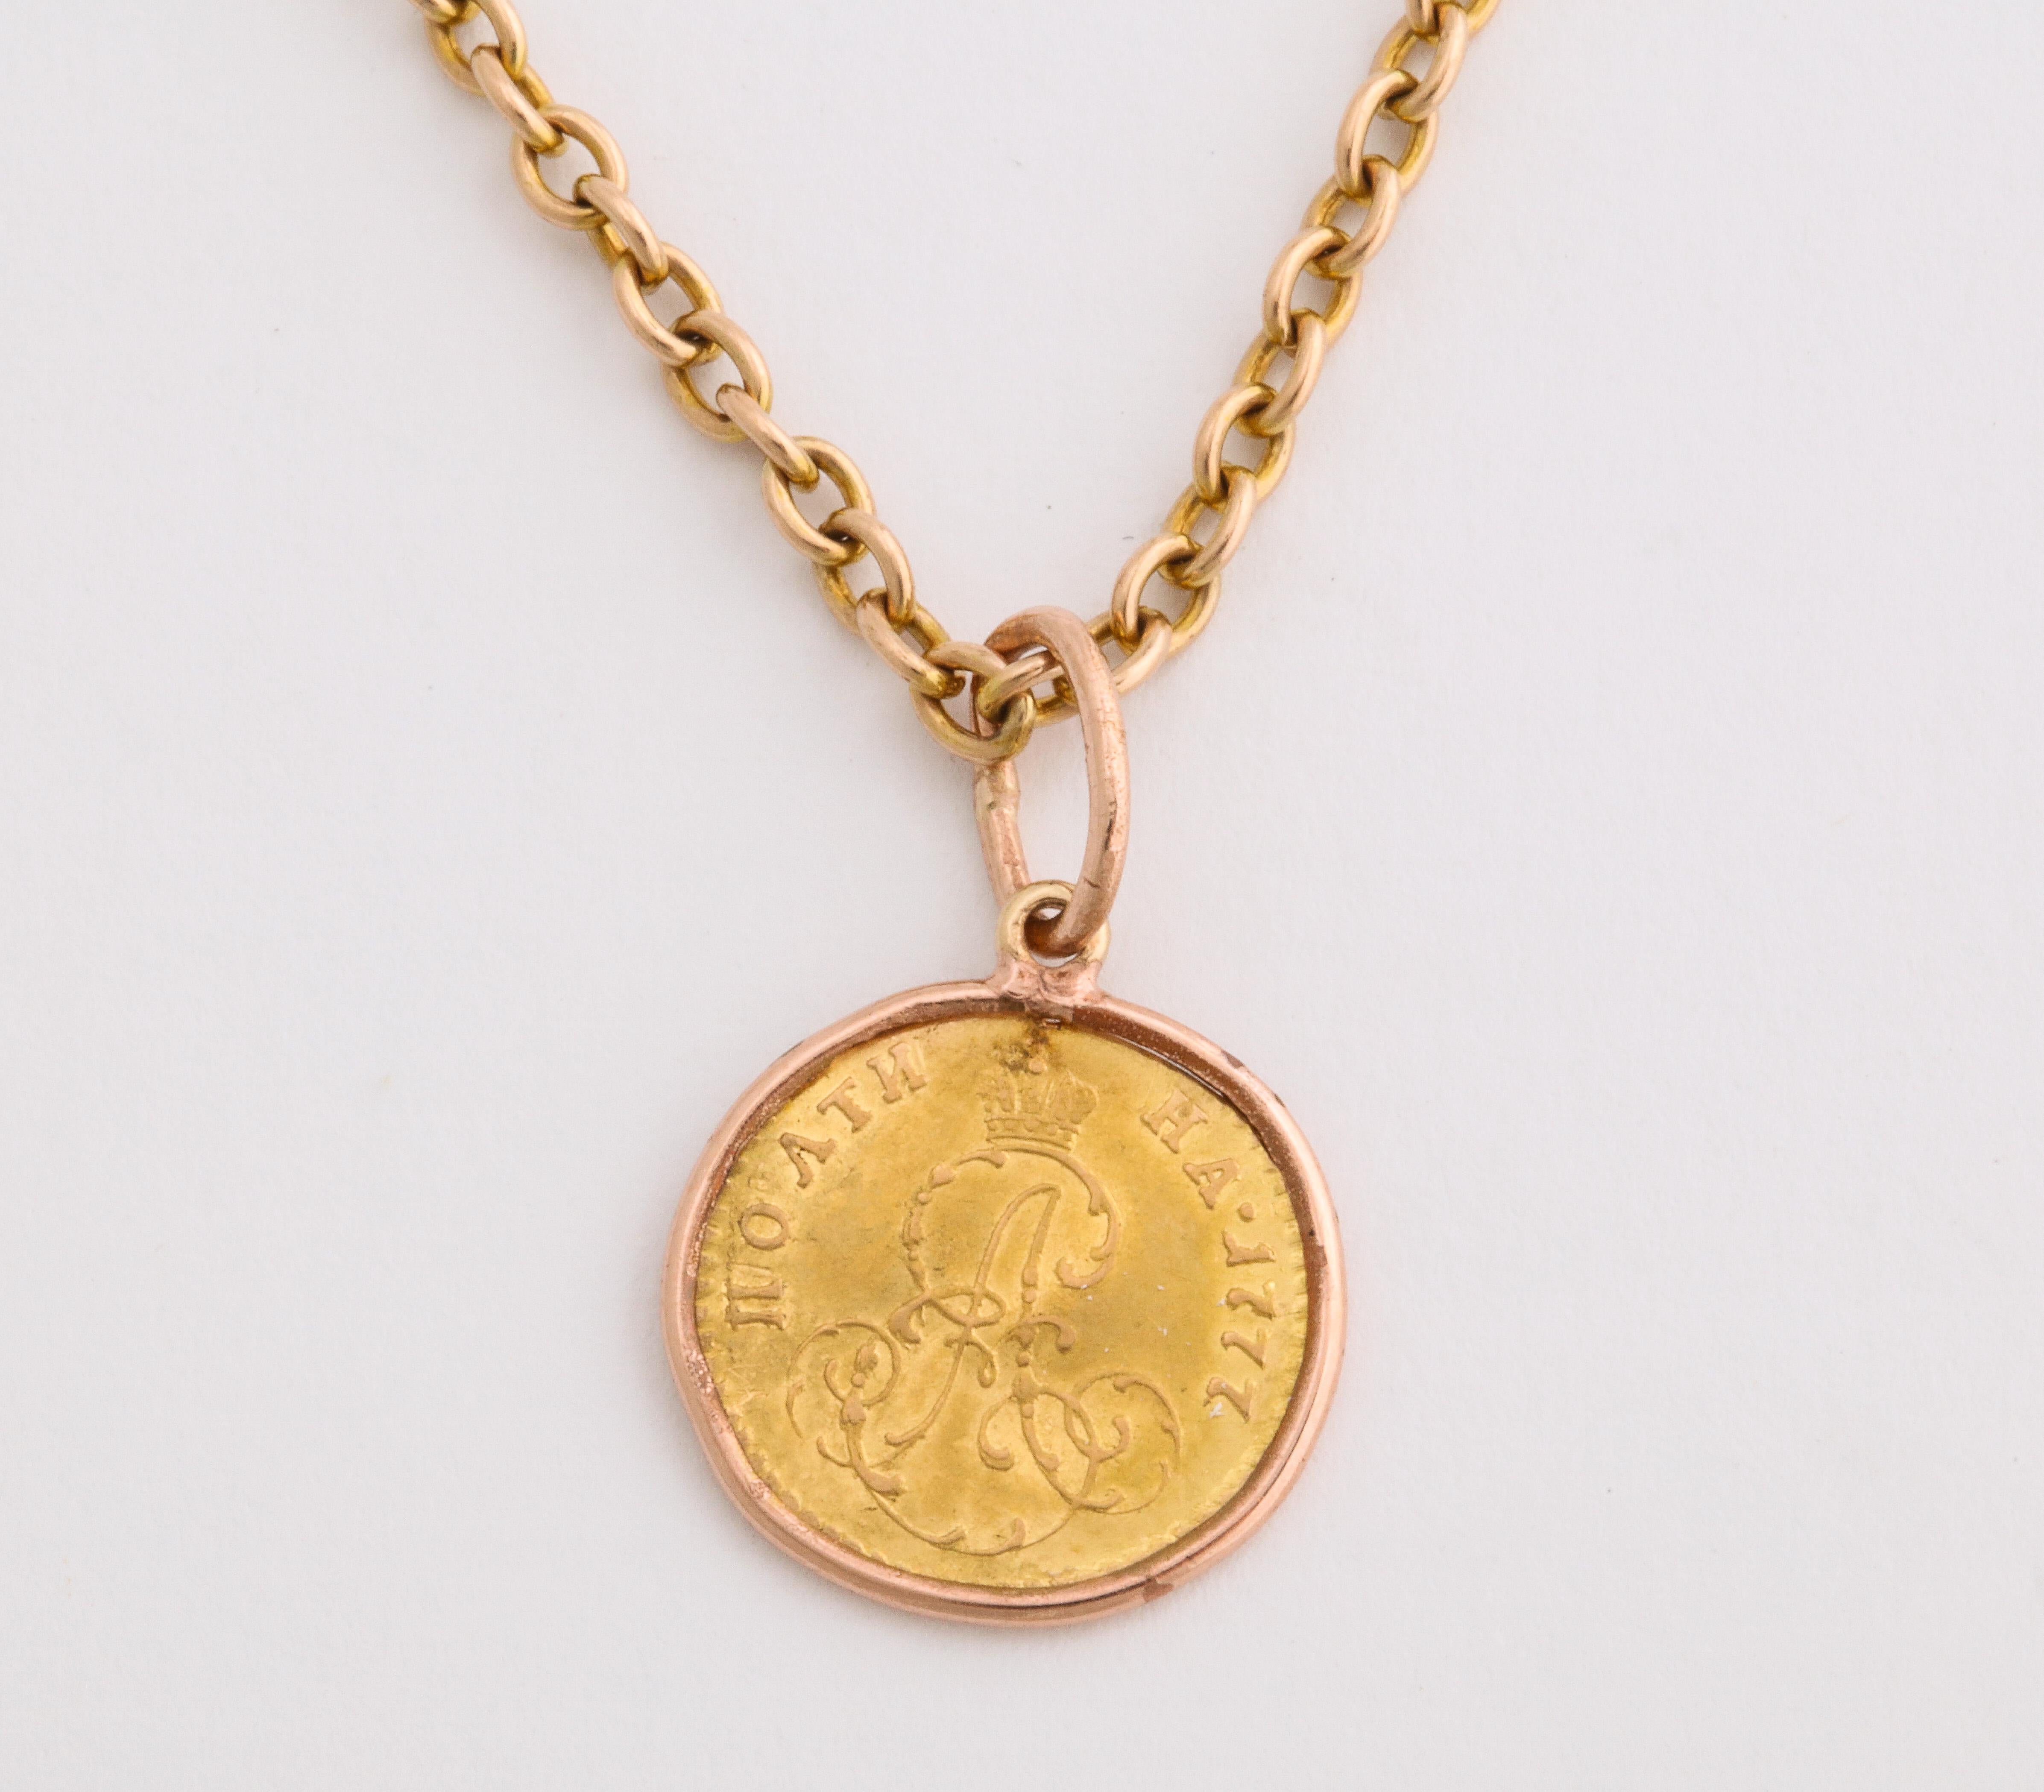 Russian Empire Historic Russian Catherine the Great Gold Coin Pendant, 1777